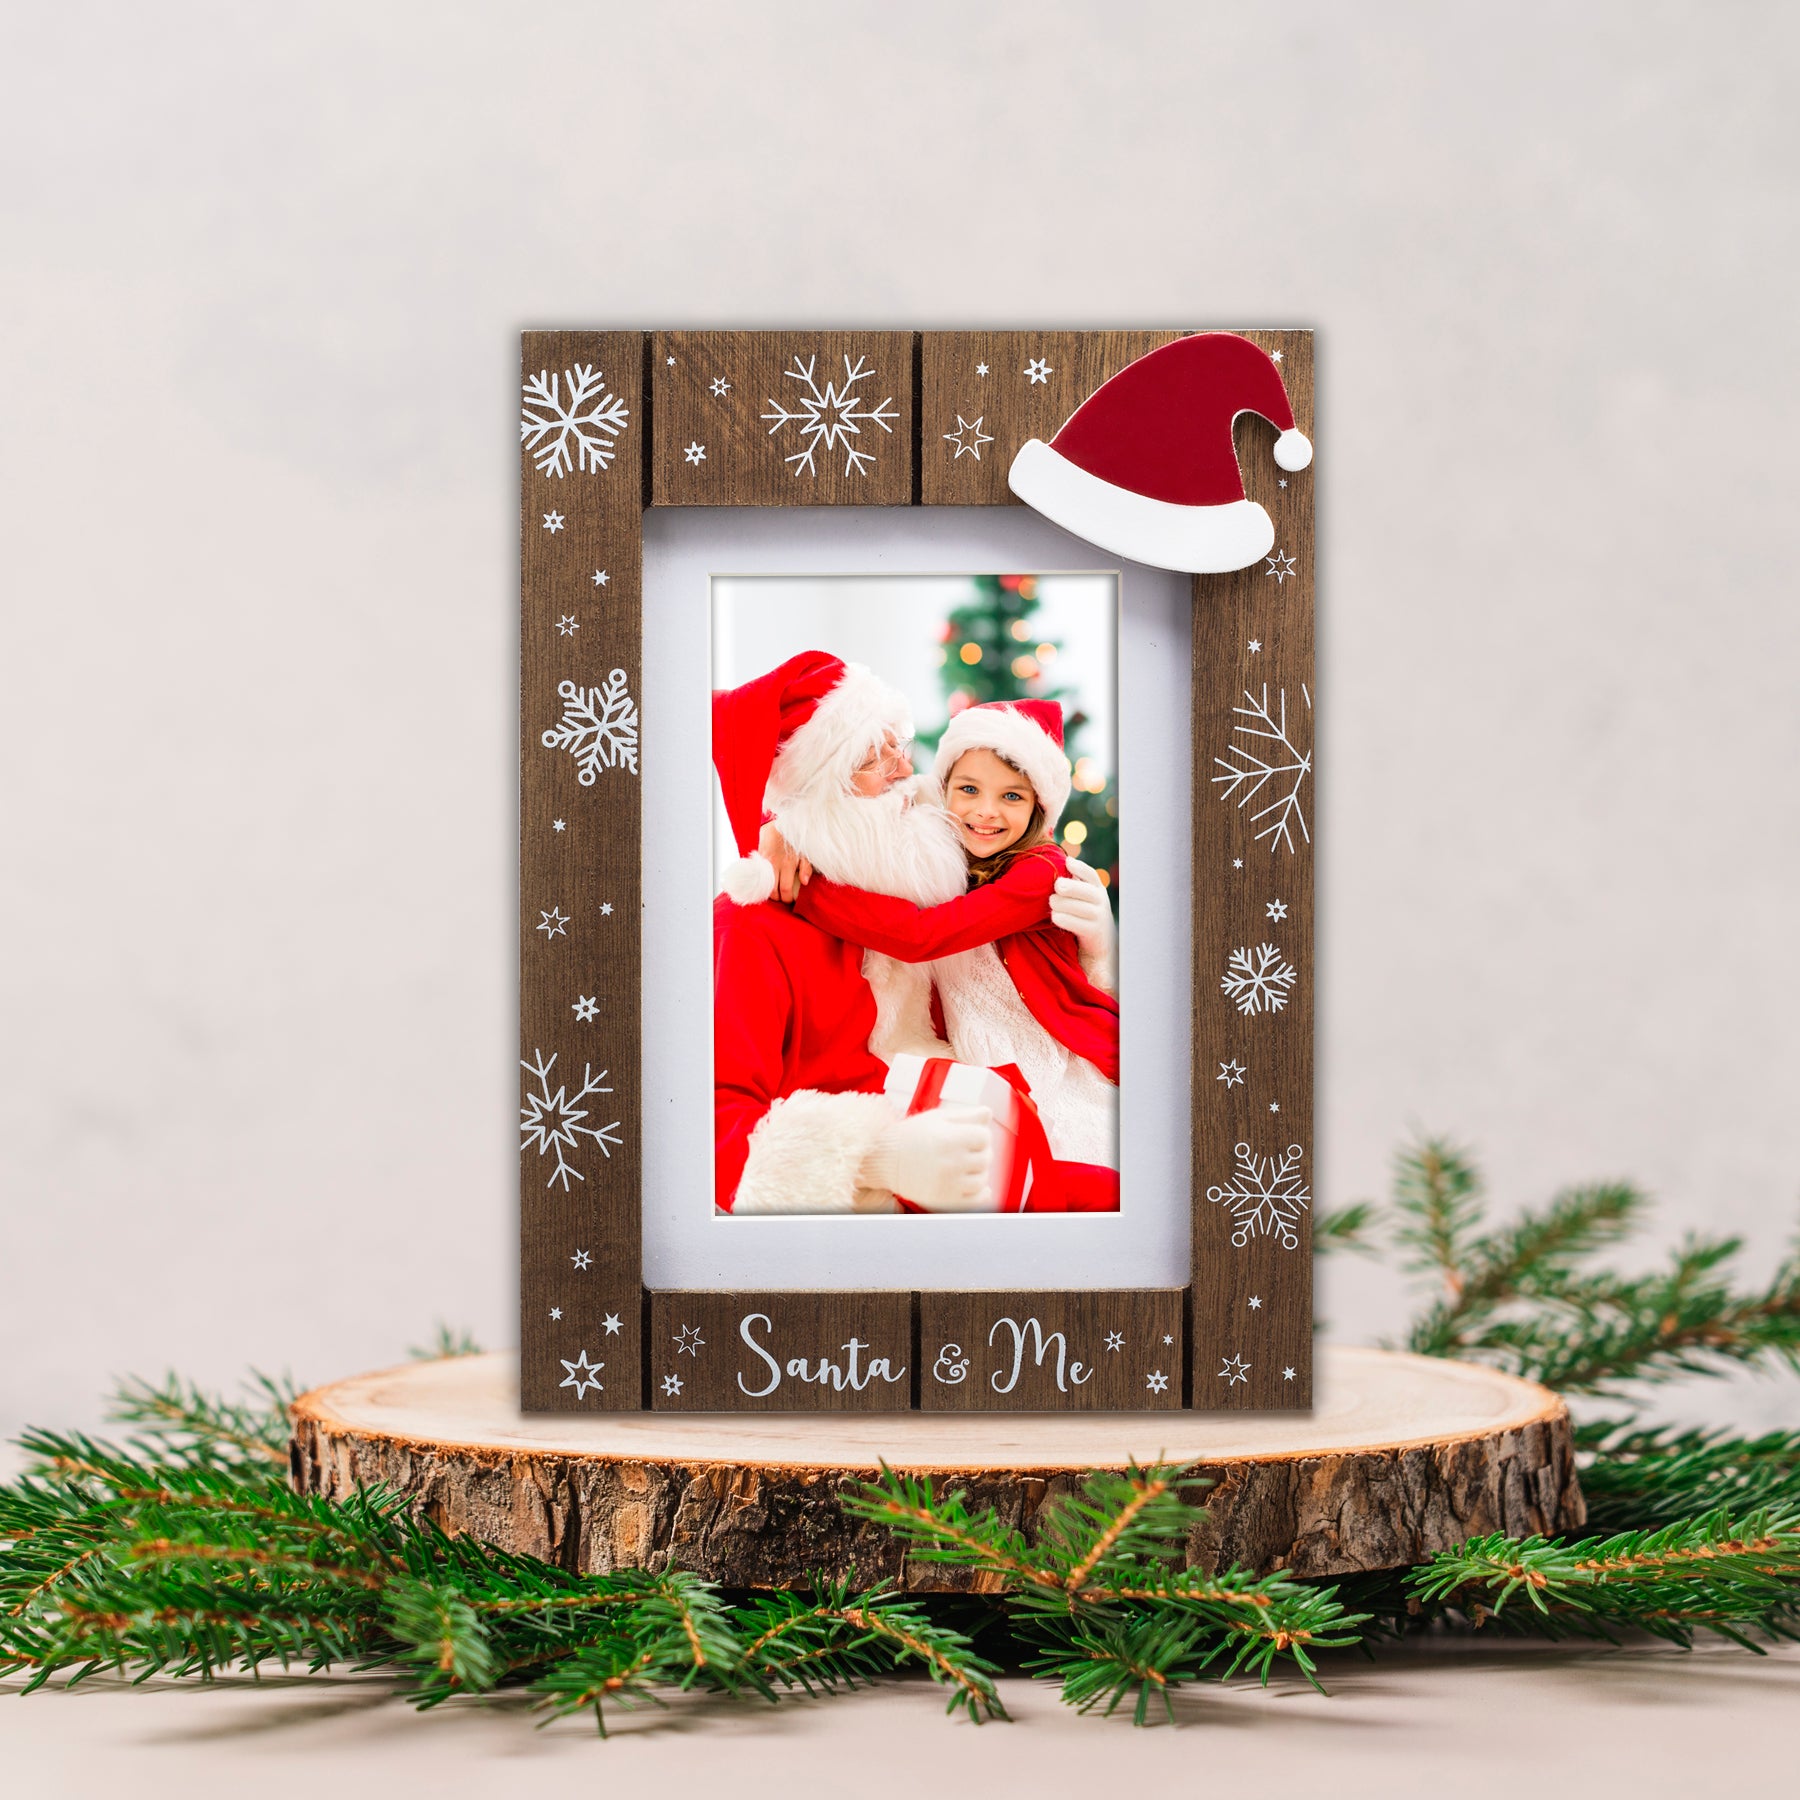 Santa and Me Wood Picture Frames